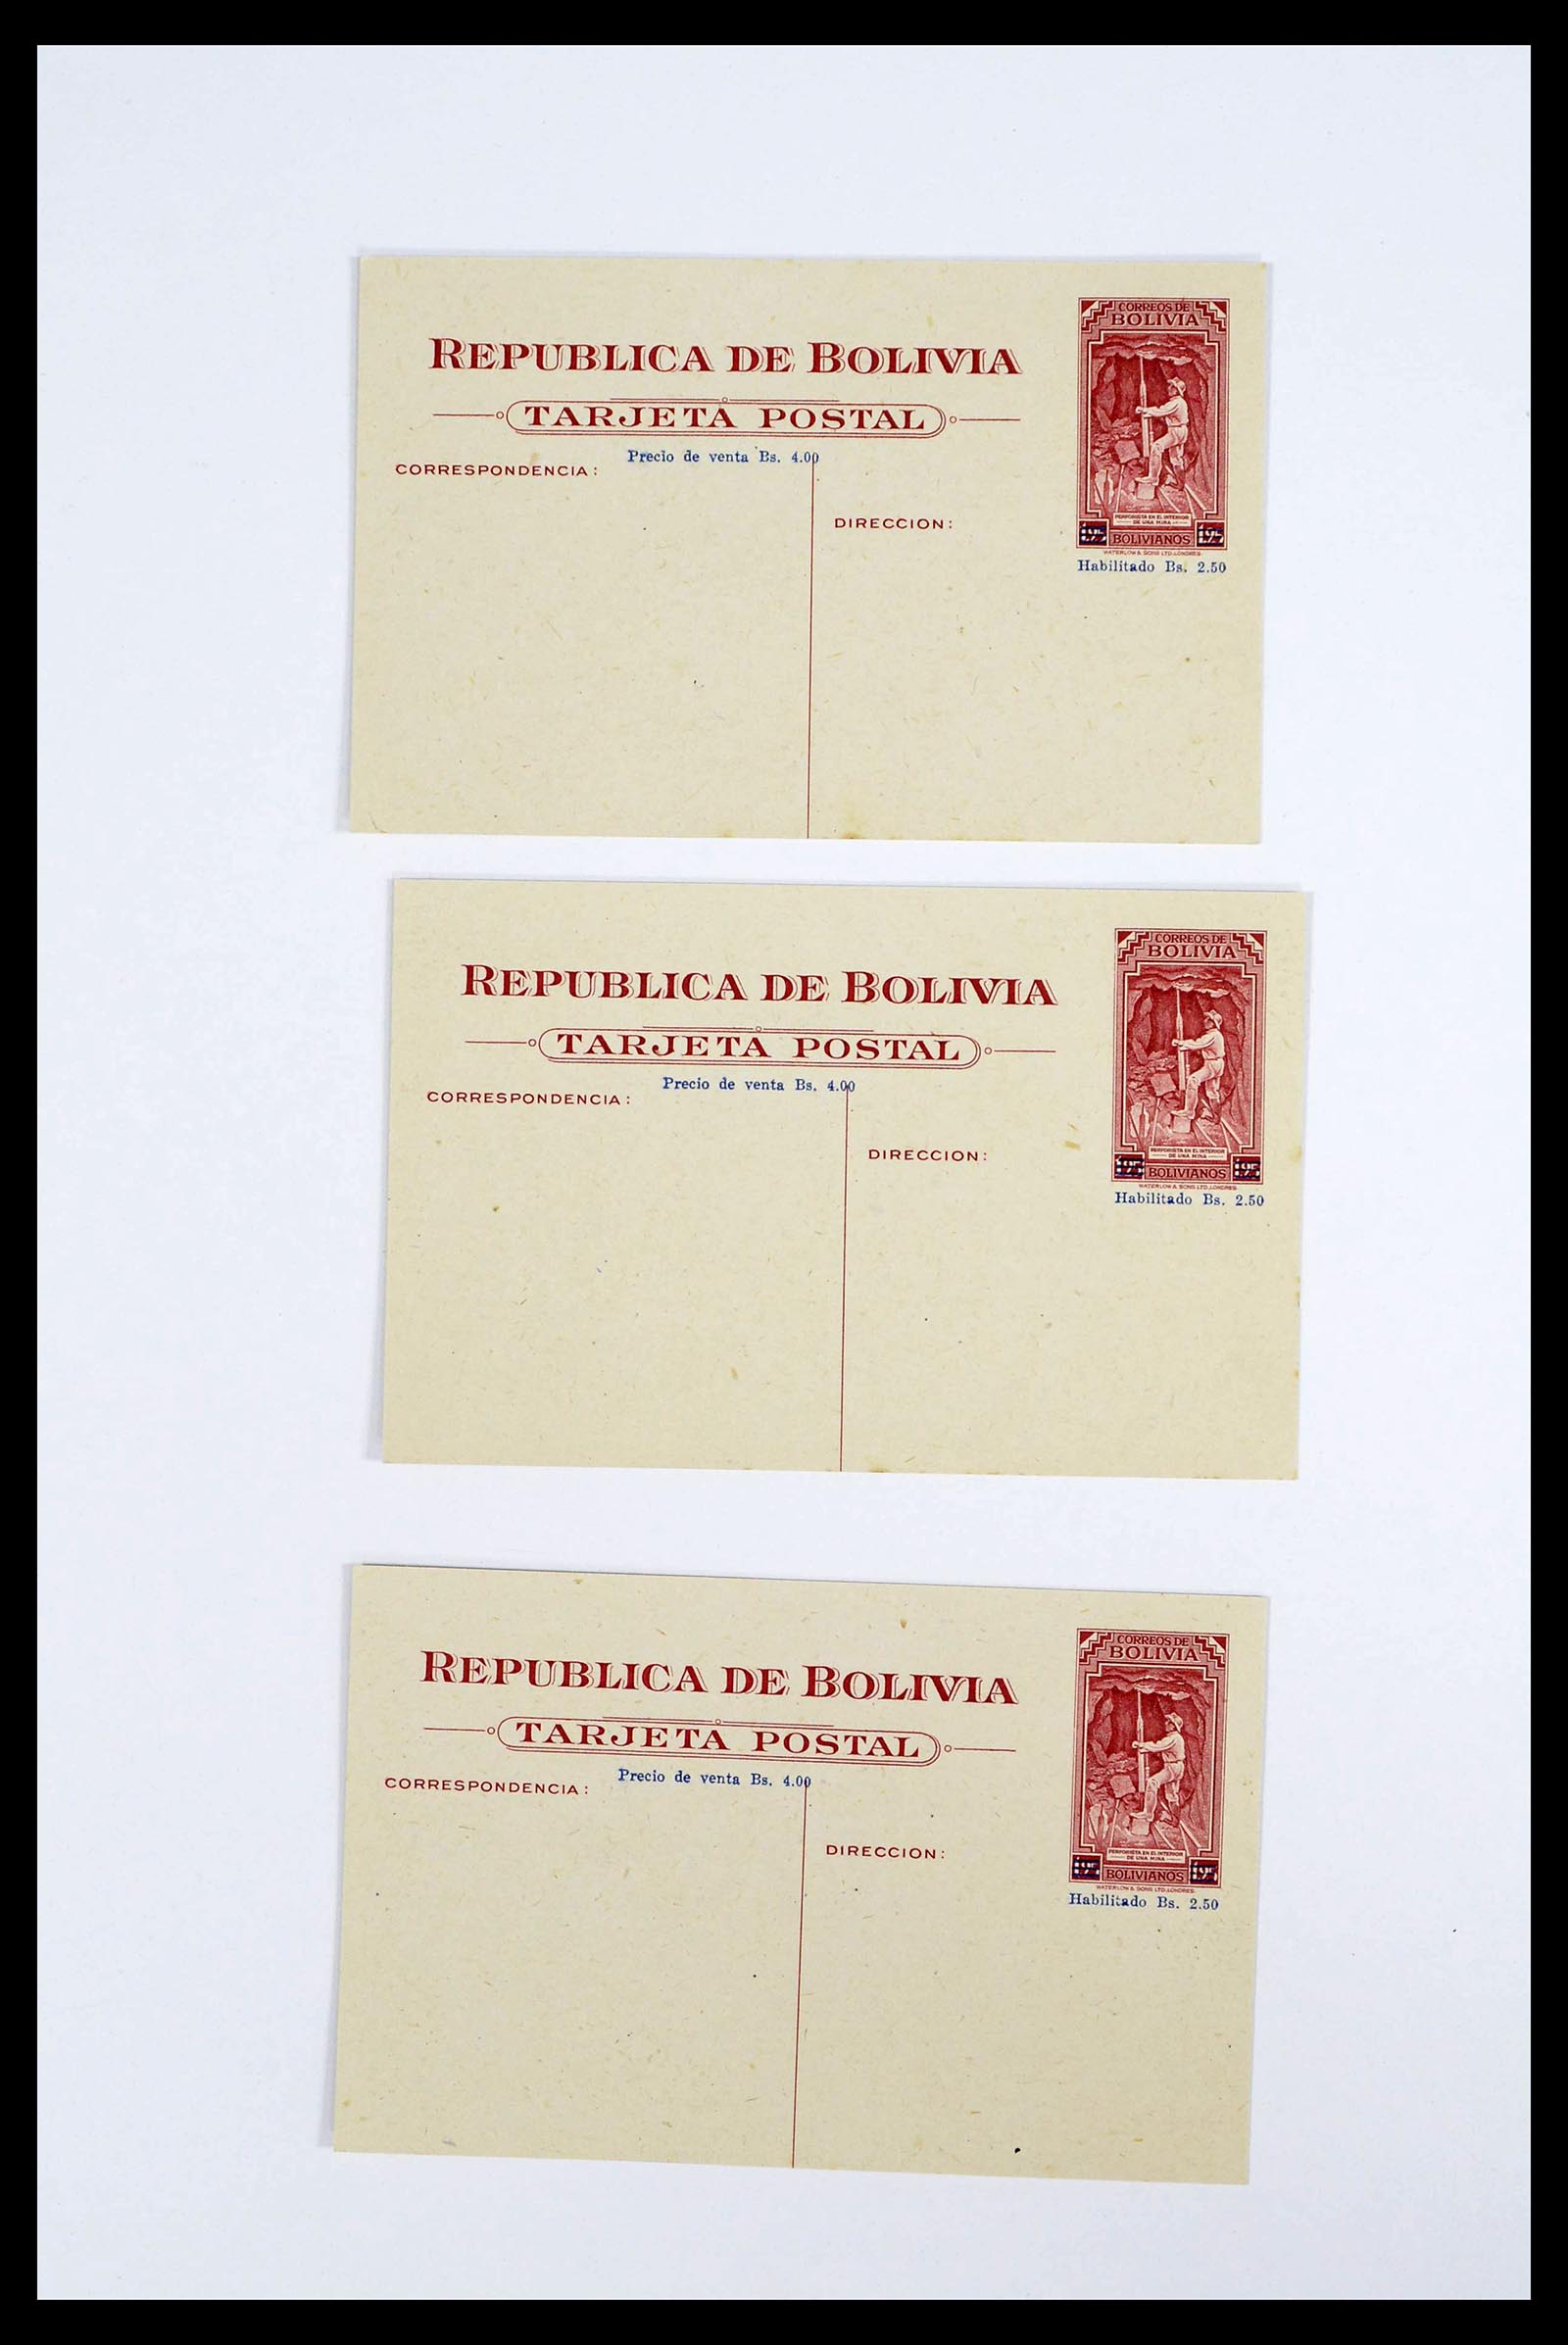 39271 0037 - Stamp collection 39271 Bolivia covers 1950-1980.